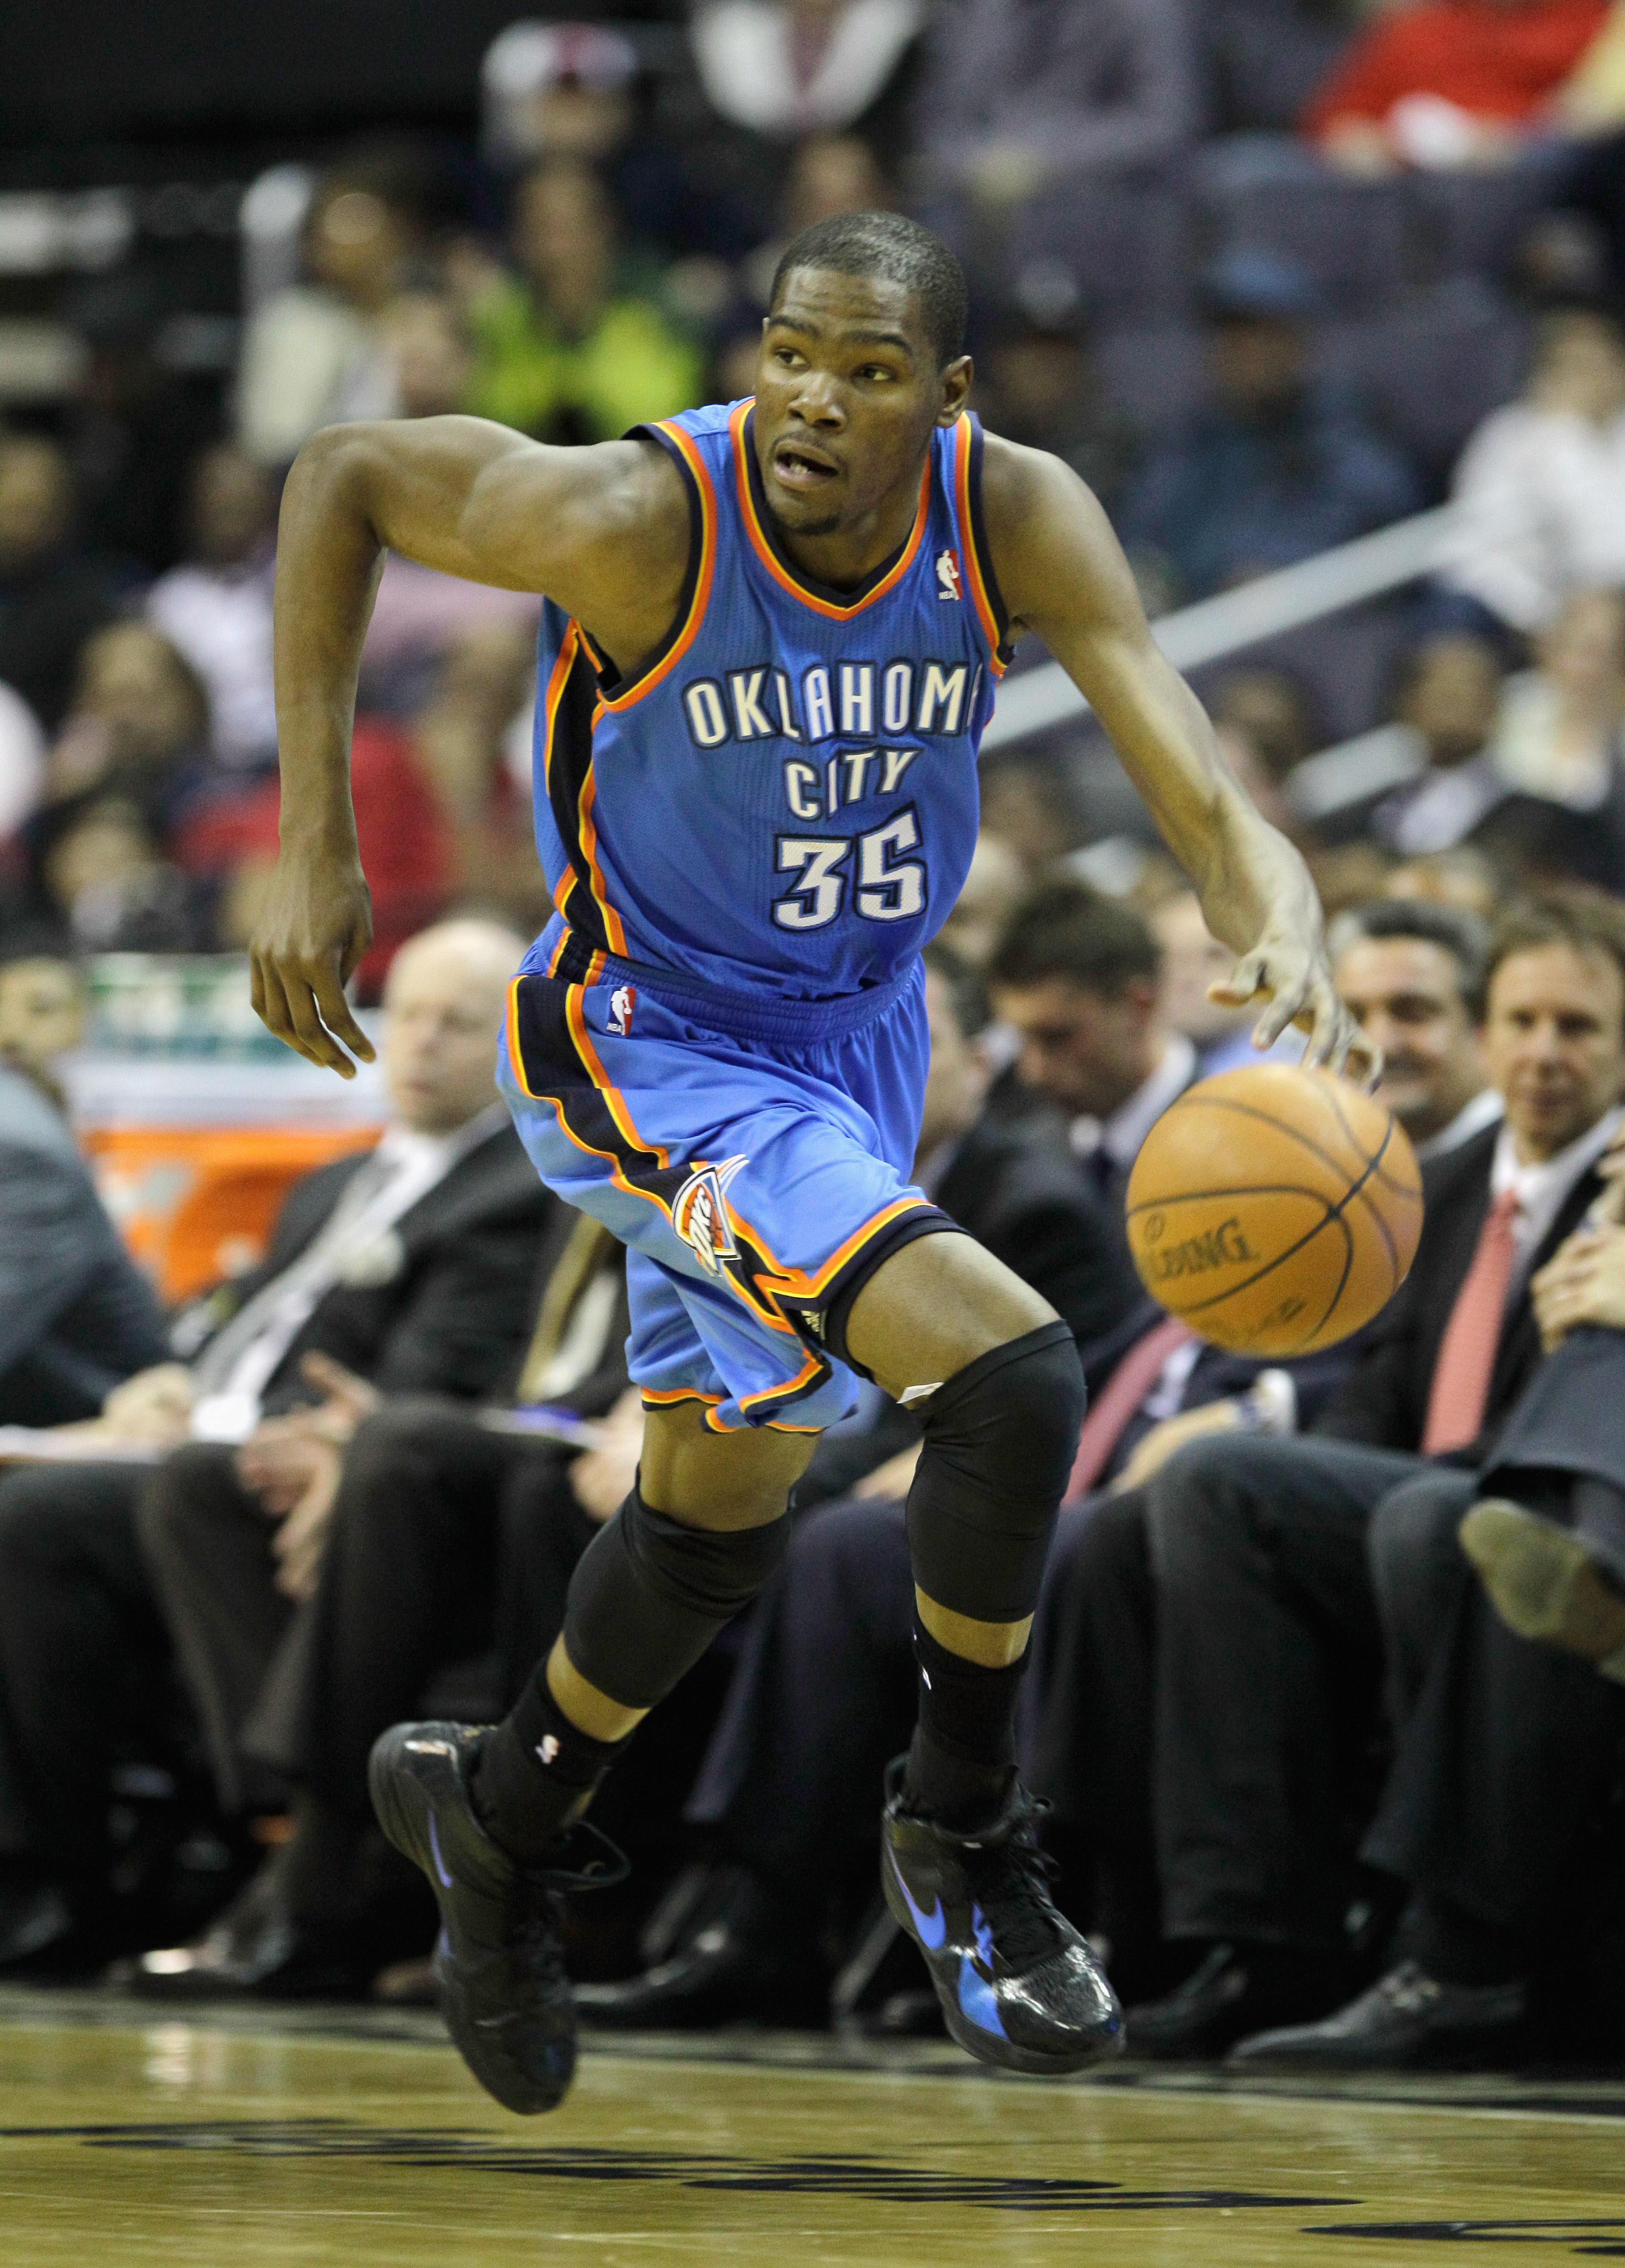 WASHINGTON, DC - MARCH 14: Kevin Durant #35 of the Oklahoma City Thunder brings the ball up the floor against the Washington Wizards  during the first half at the Verizon Center on March 14, 2011 in Washington, DC. NOTE TO USER: User expressly acknowledge